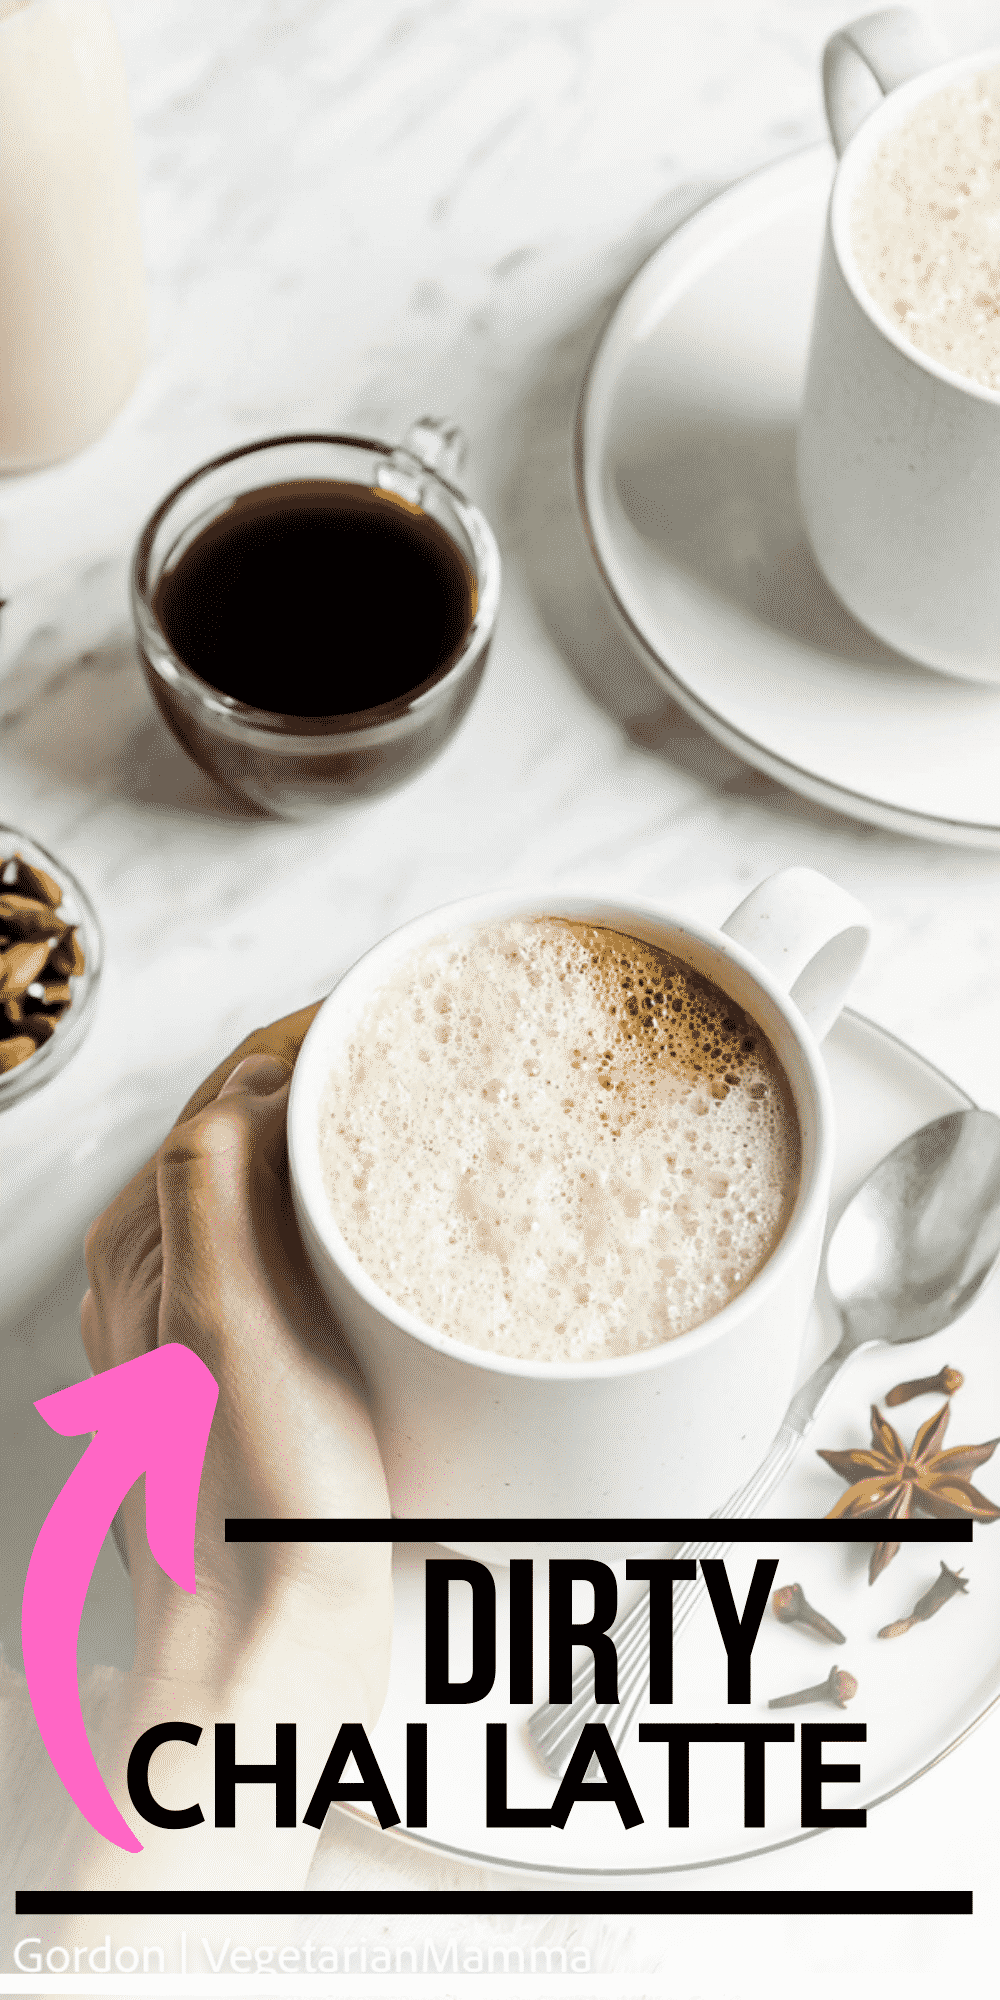 The Dirty Chai Latte is a popular drink that is served up at many coffee shops. We've created a vegan Dirty Chai Latte Starbucks CopyCat recipe that you can make at home for a fraction of the price!